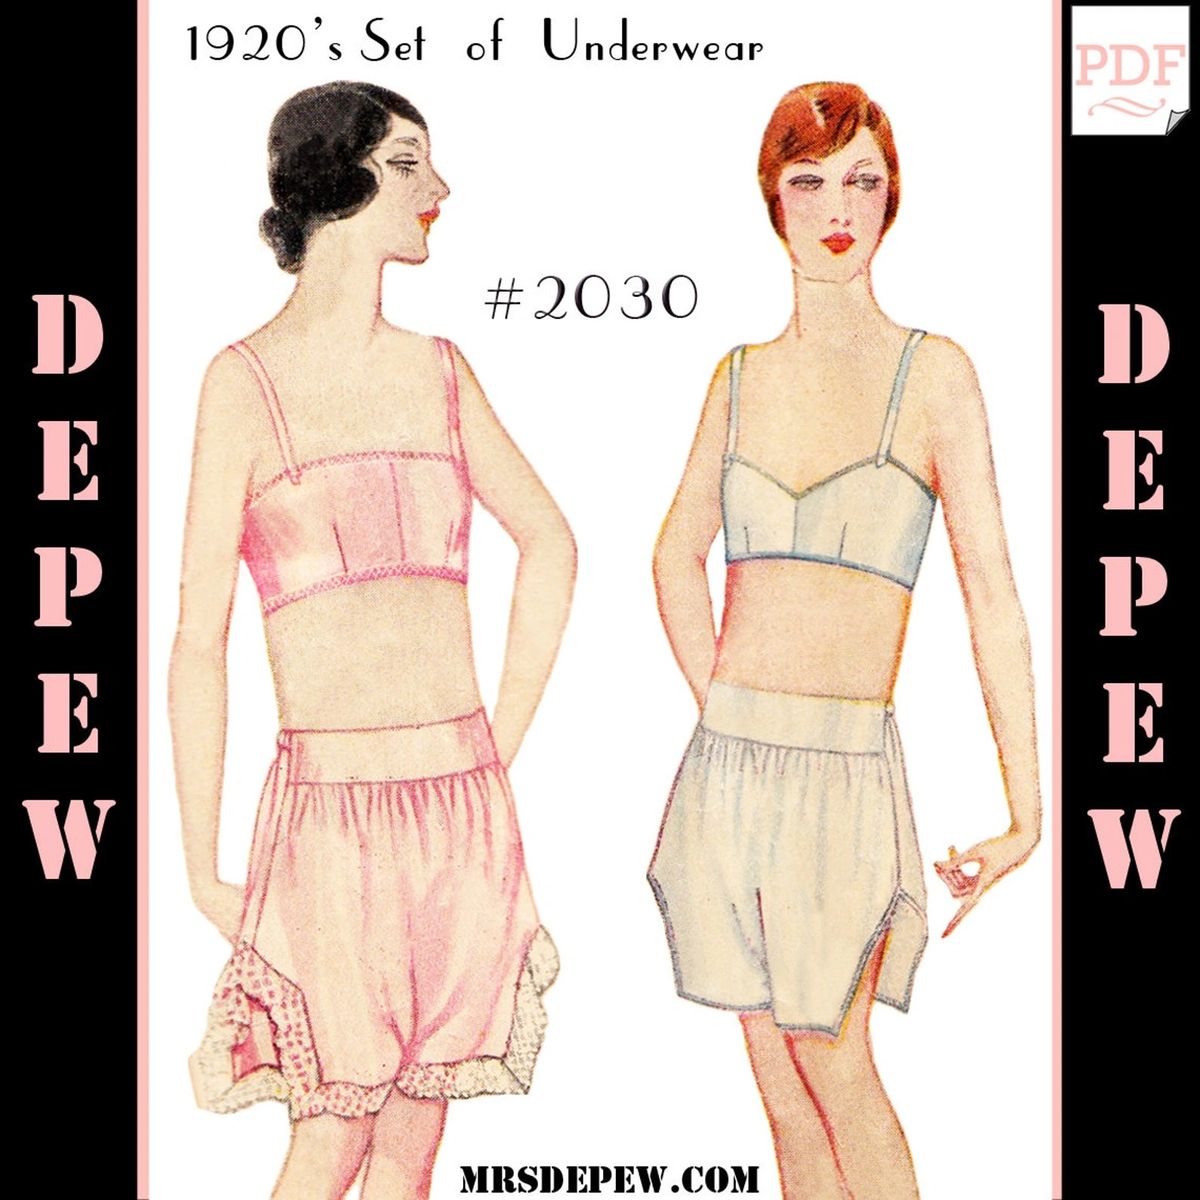 Vintage Sewing Pattern Ladies' 1920s Step-in and Bra #2030 Multi Size  Lingerie Set -INSTANT DOWNLOAD PDF